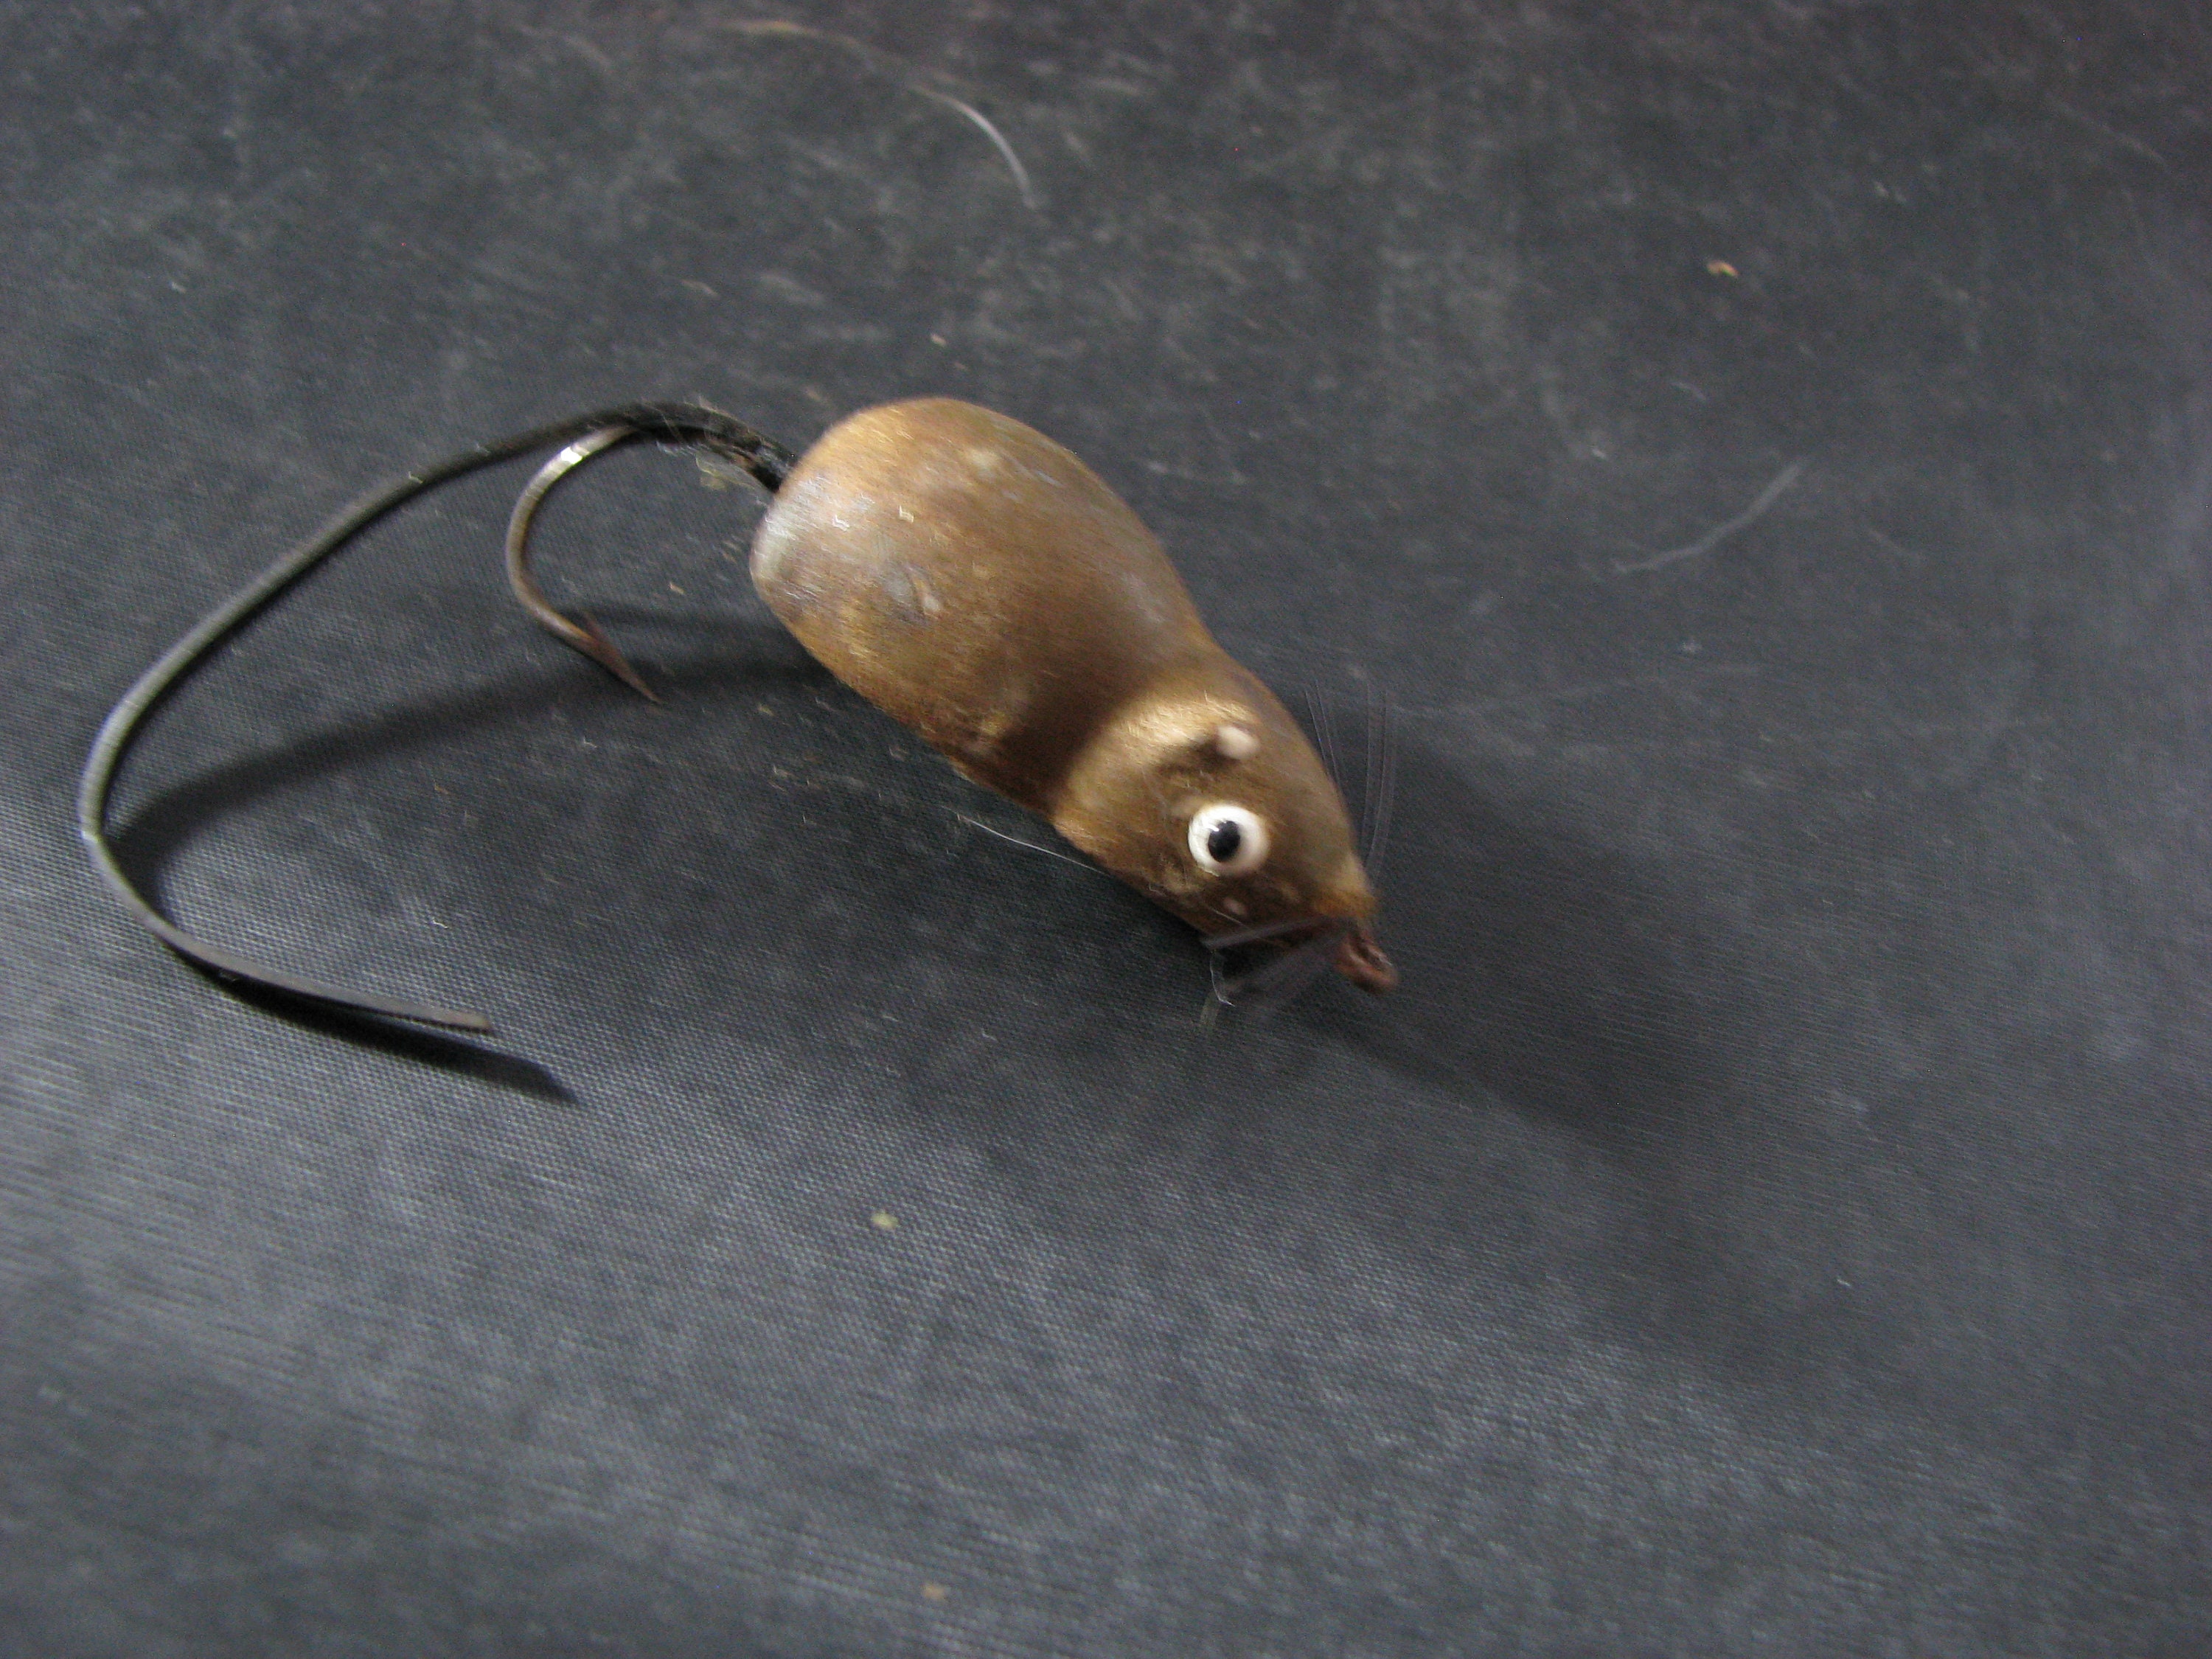 Vintage Heddon Meadow Mouse Fishing Lure Near Mint Condition